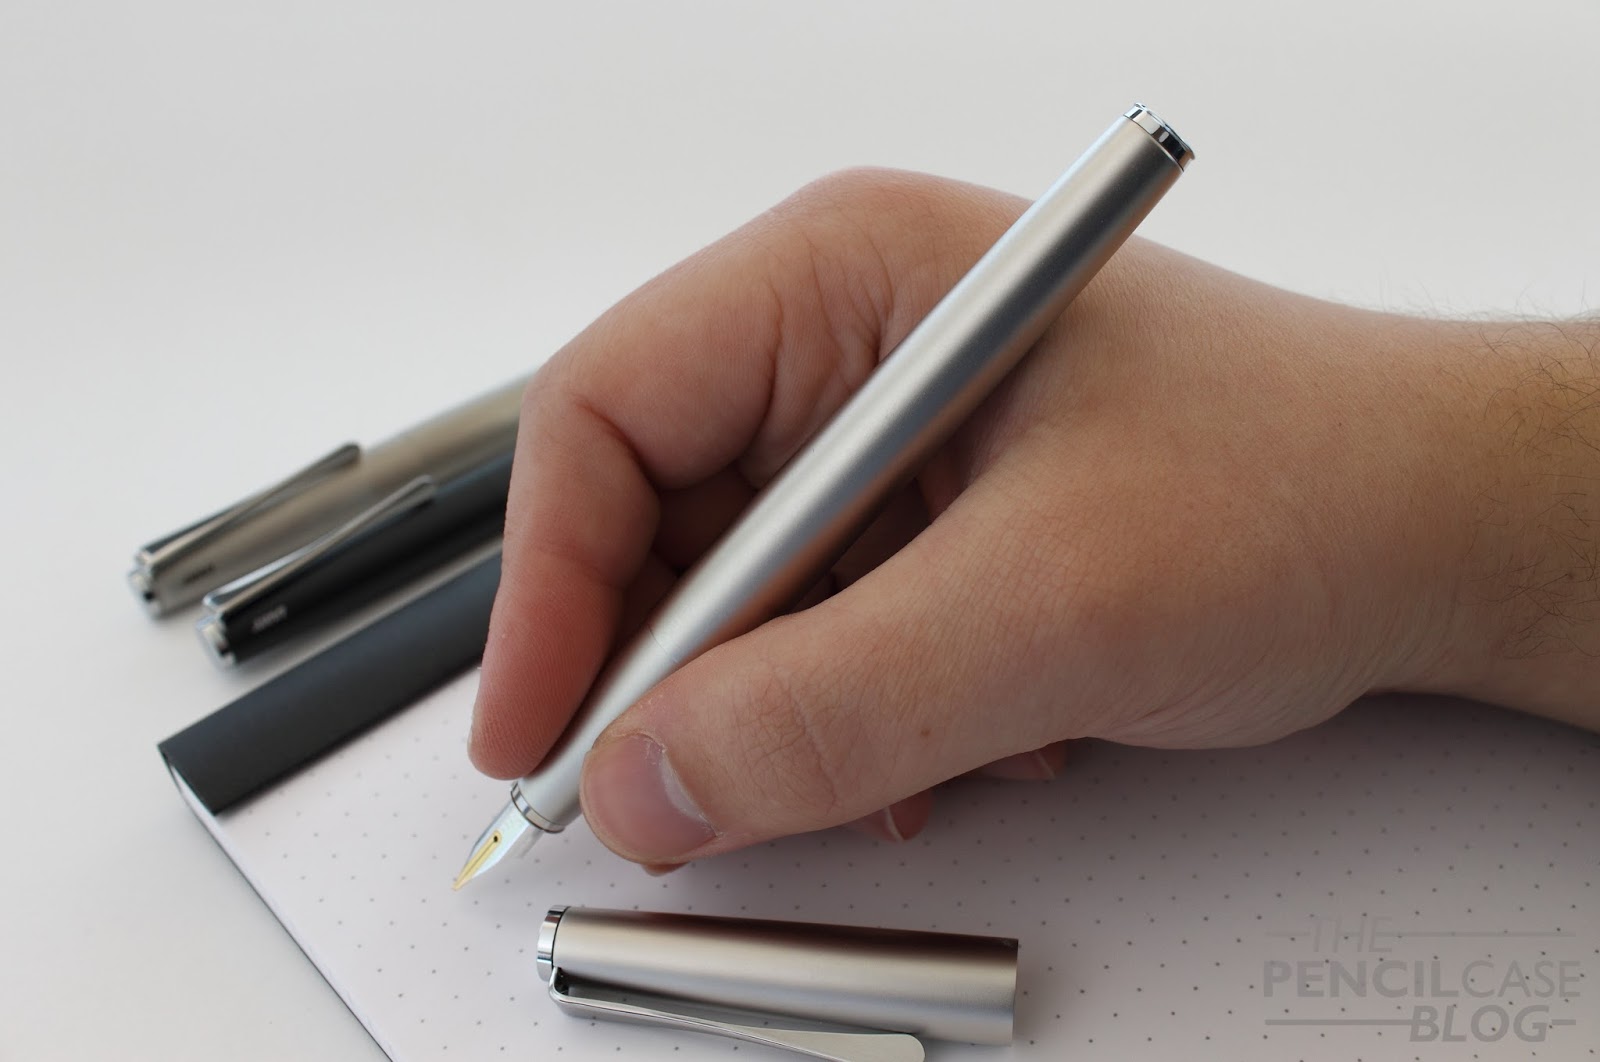 Omringd leerling getuige LAMY STUDIO FOUNTAIN PEN REVIEW | The Pencilcase Blog | Fountain pen,  Pencil, Ink and Paper reviews